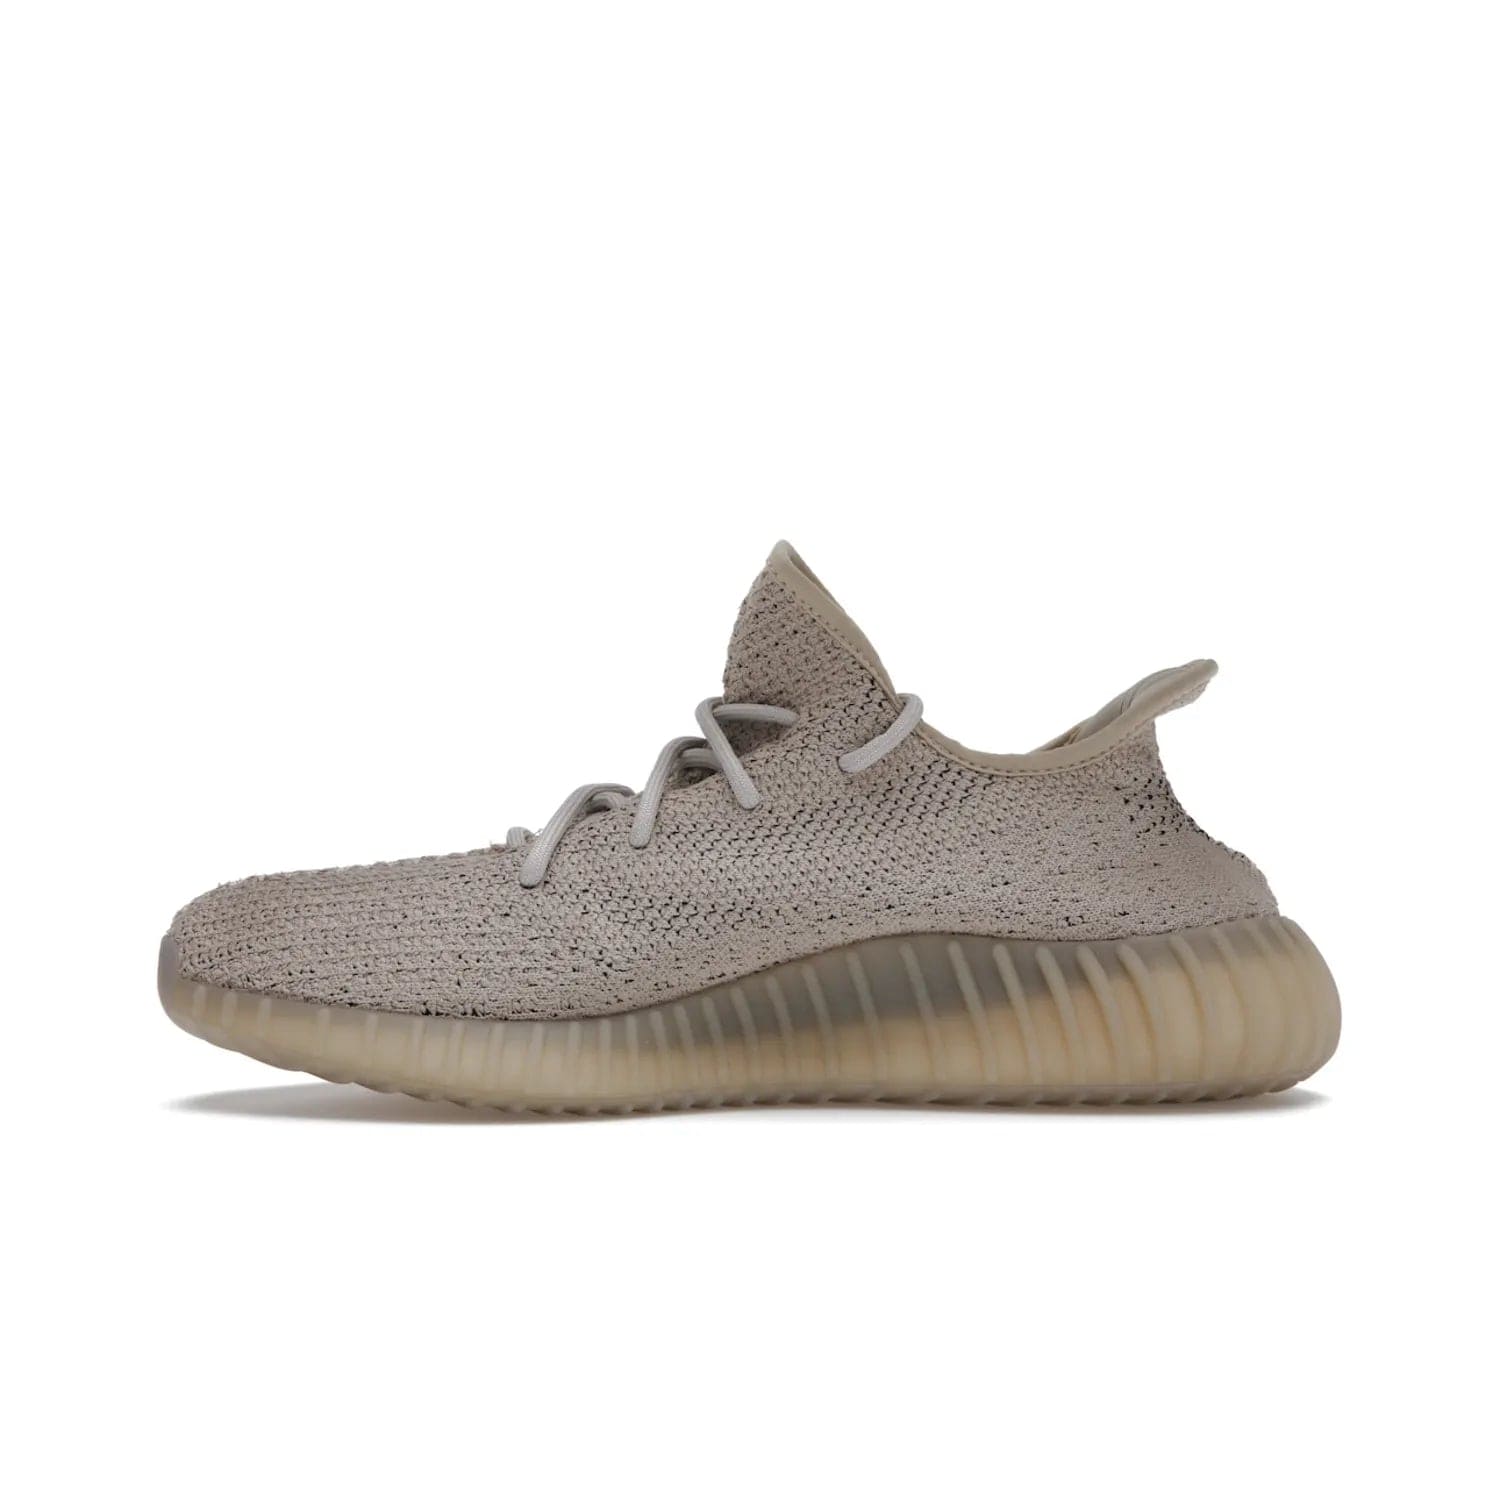 adidas Yeezy Boost 350 V2 Slate - Image 19 - Only at www.BallersClubKickz.com - Adidas Yeezy Boost 350 V2 Slate Core Black Slate featuring Primeknit upper, Boost midsole and semi-translucent TPU cage. Launched on 3/9/2022, retailed at $230.